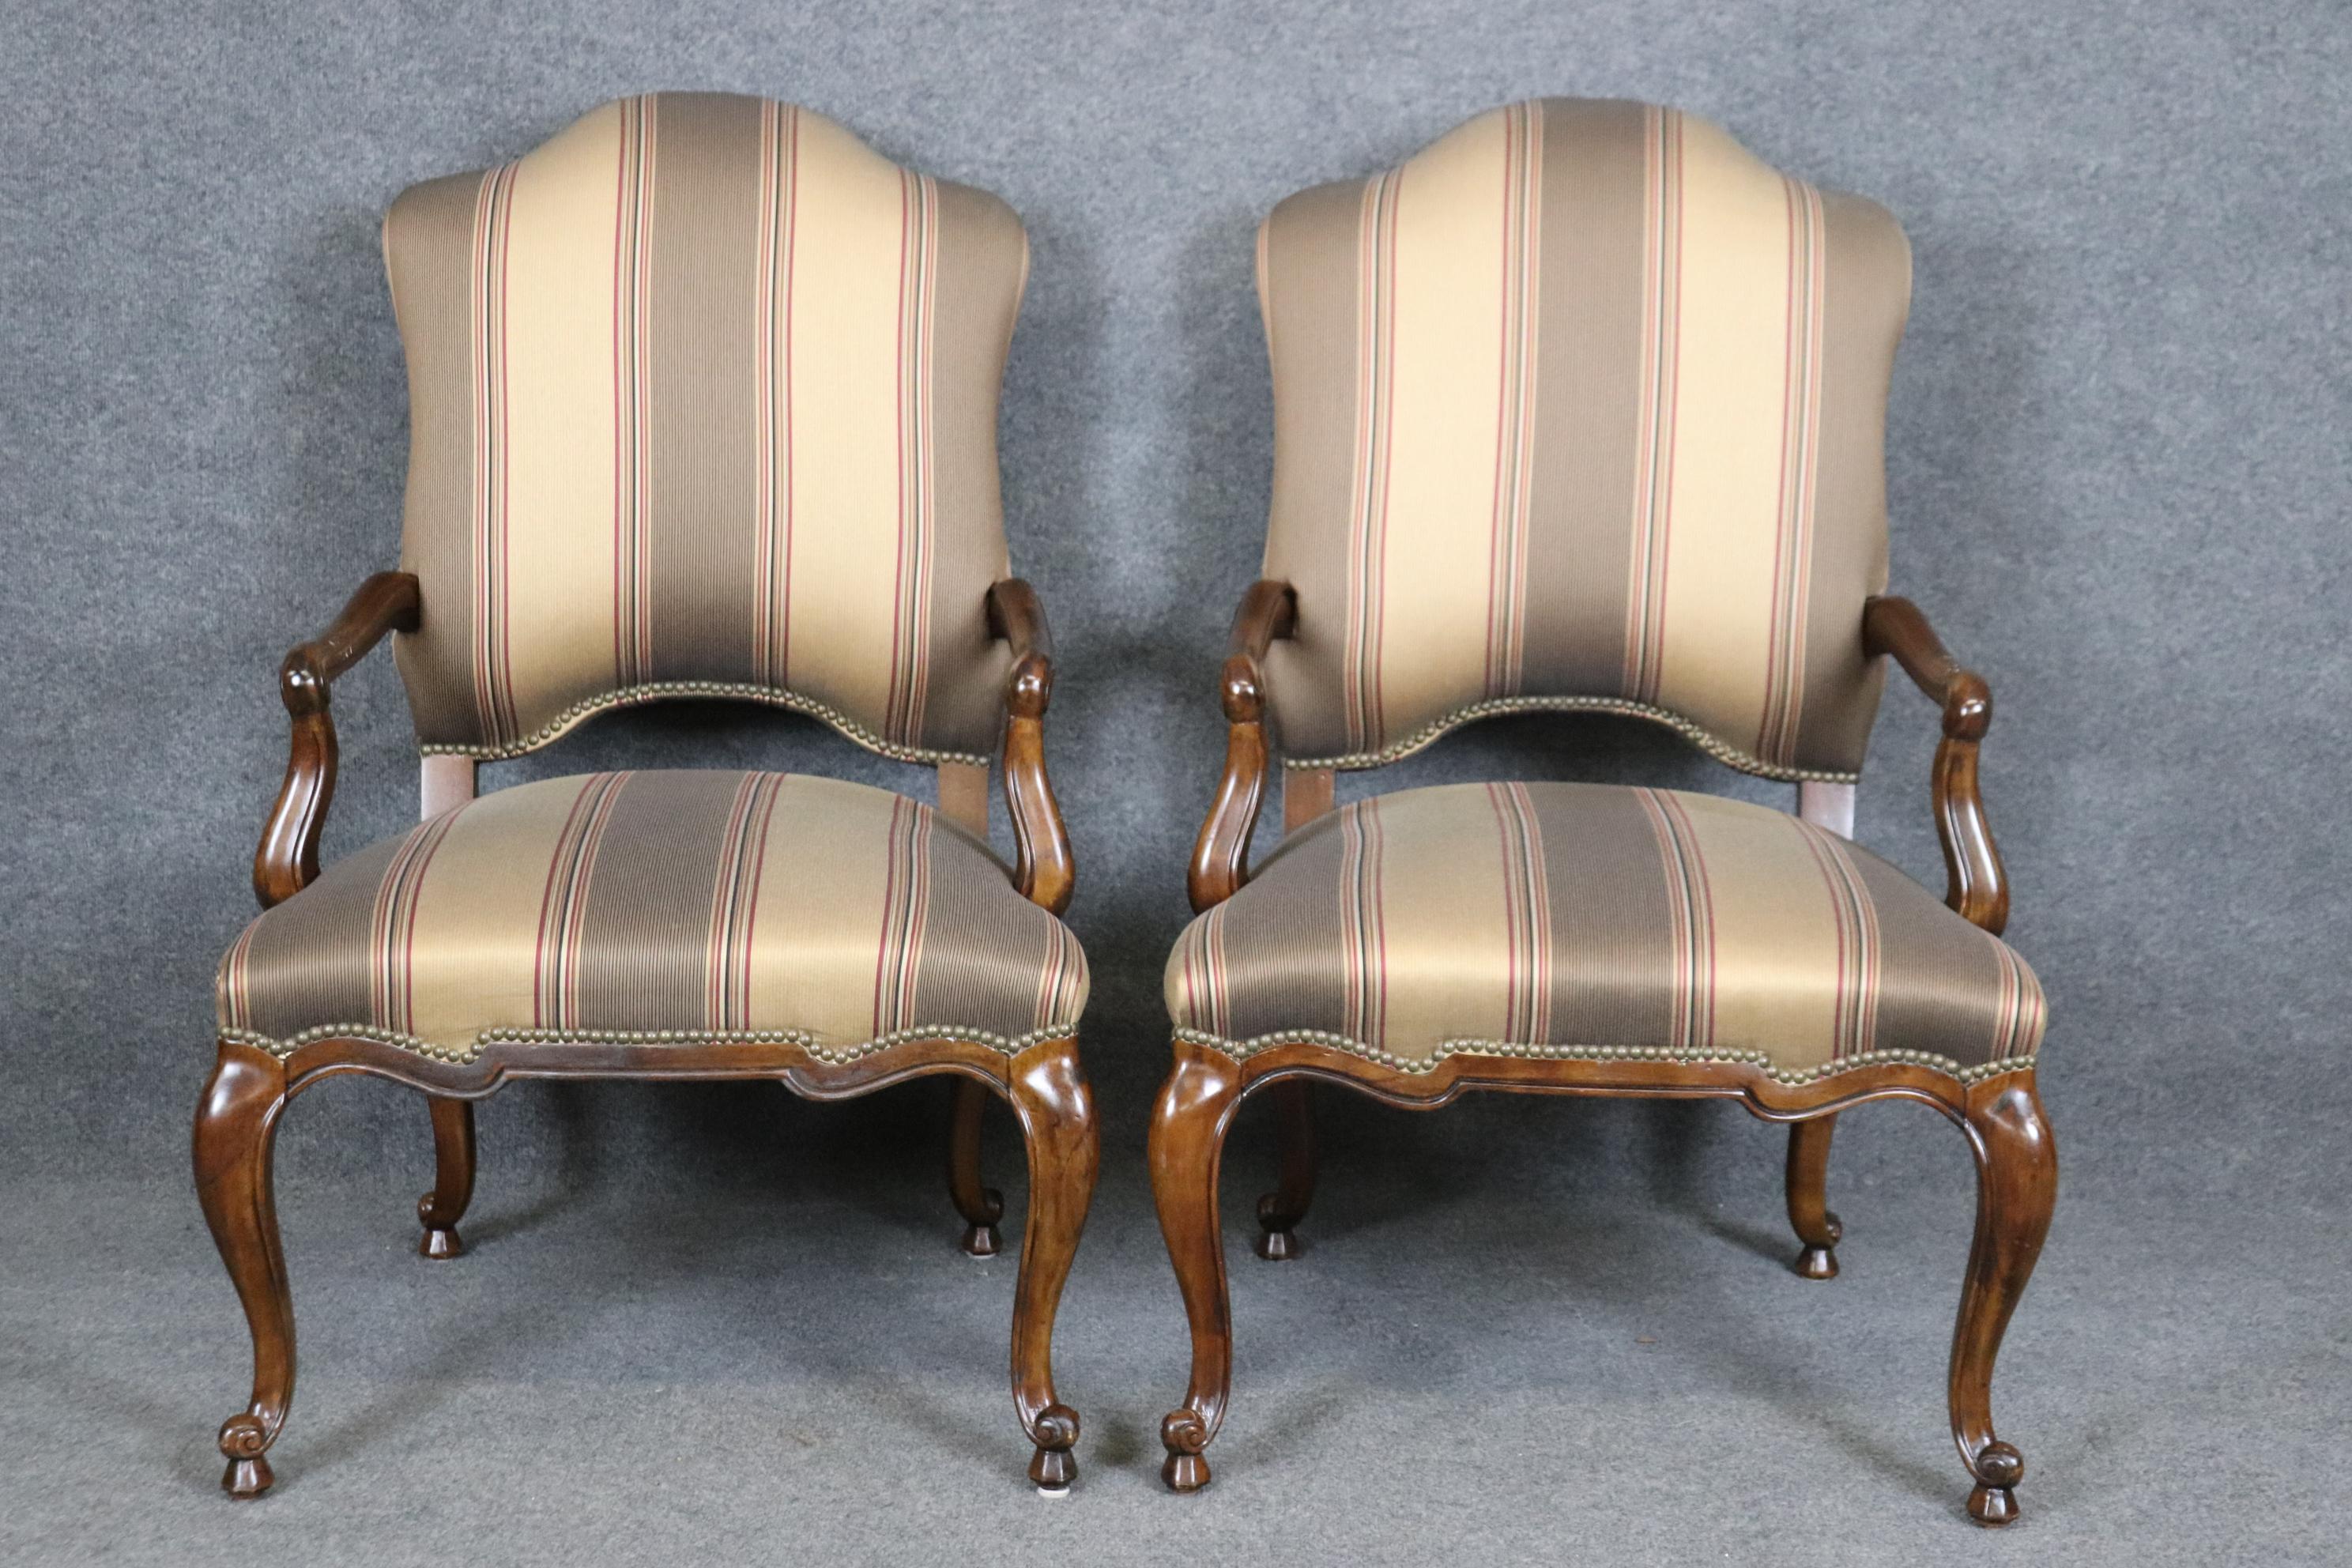 This is a gorgeous pair of solid walnut Century armchairs made by Century of North Carolina and are in good condition with minimal wear and signs of use. The chairs have beautiful upholstery. Measures 44.5 tall x 27.5 wide x 30.25 deep and seat